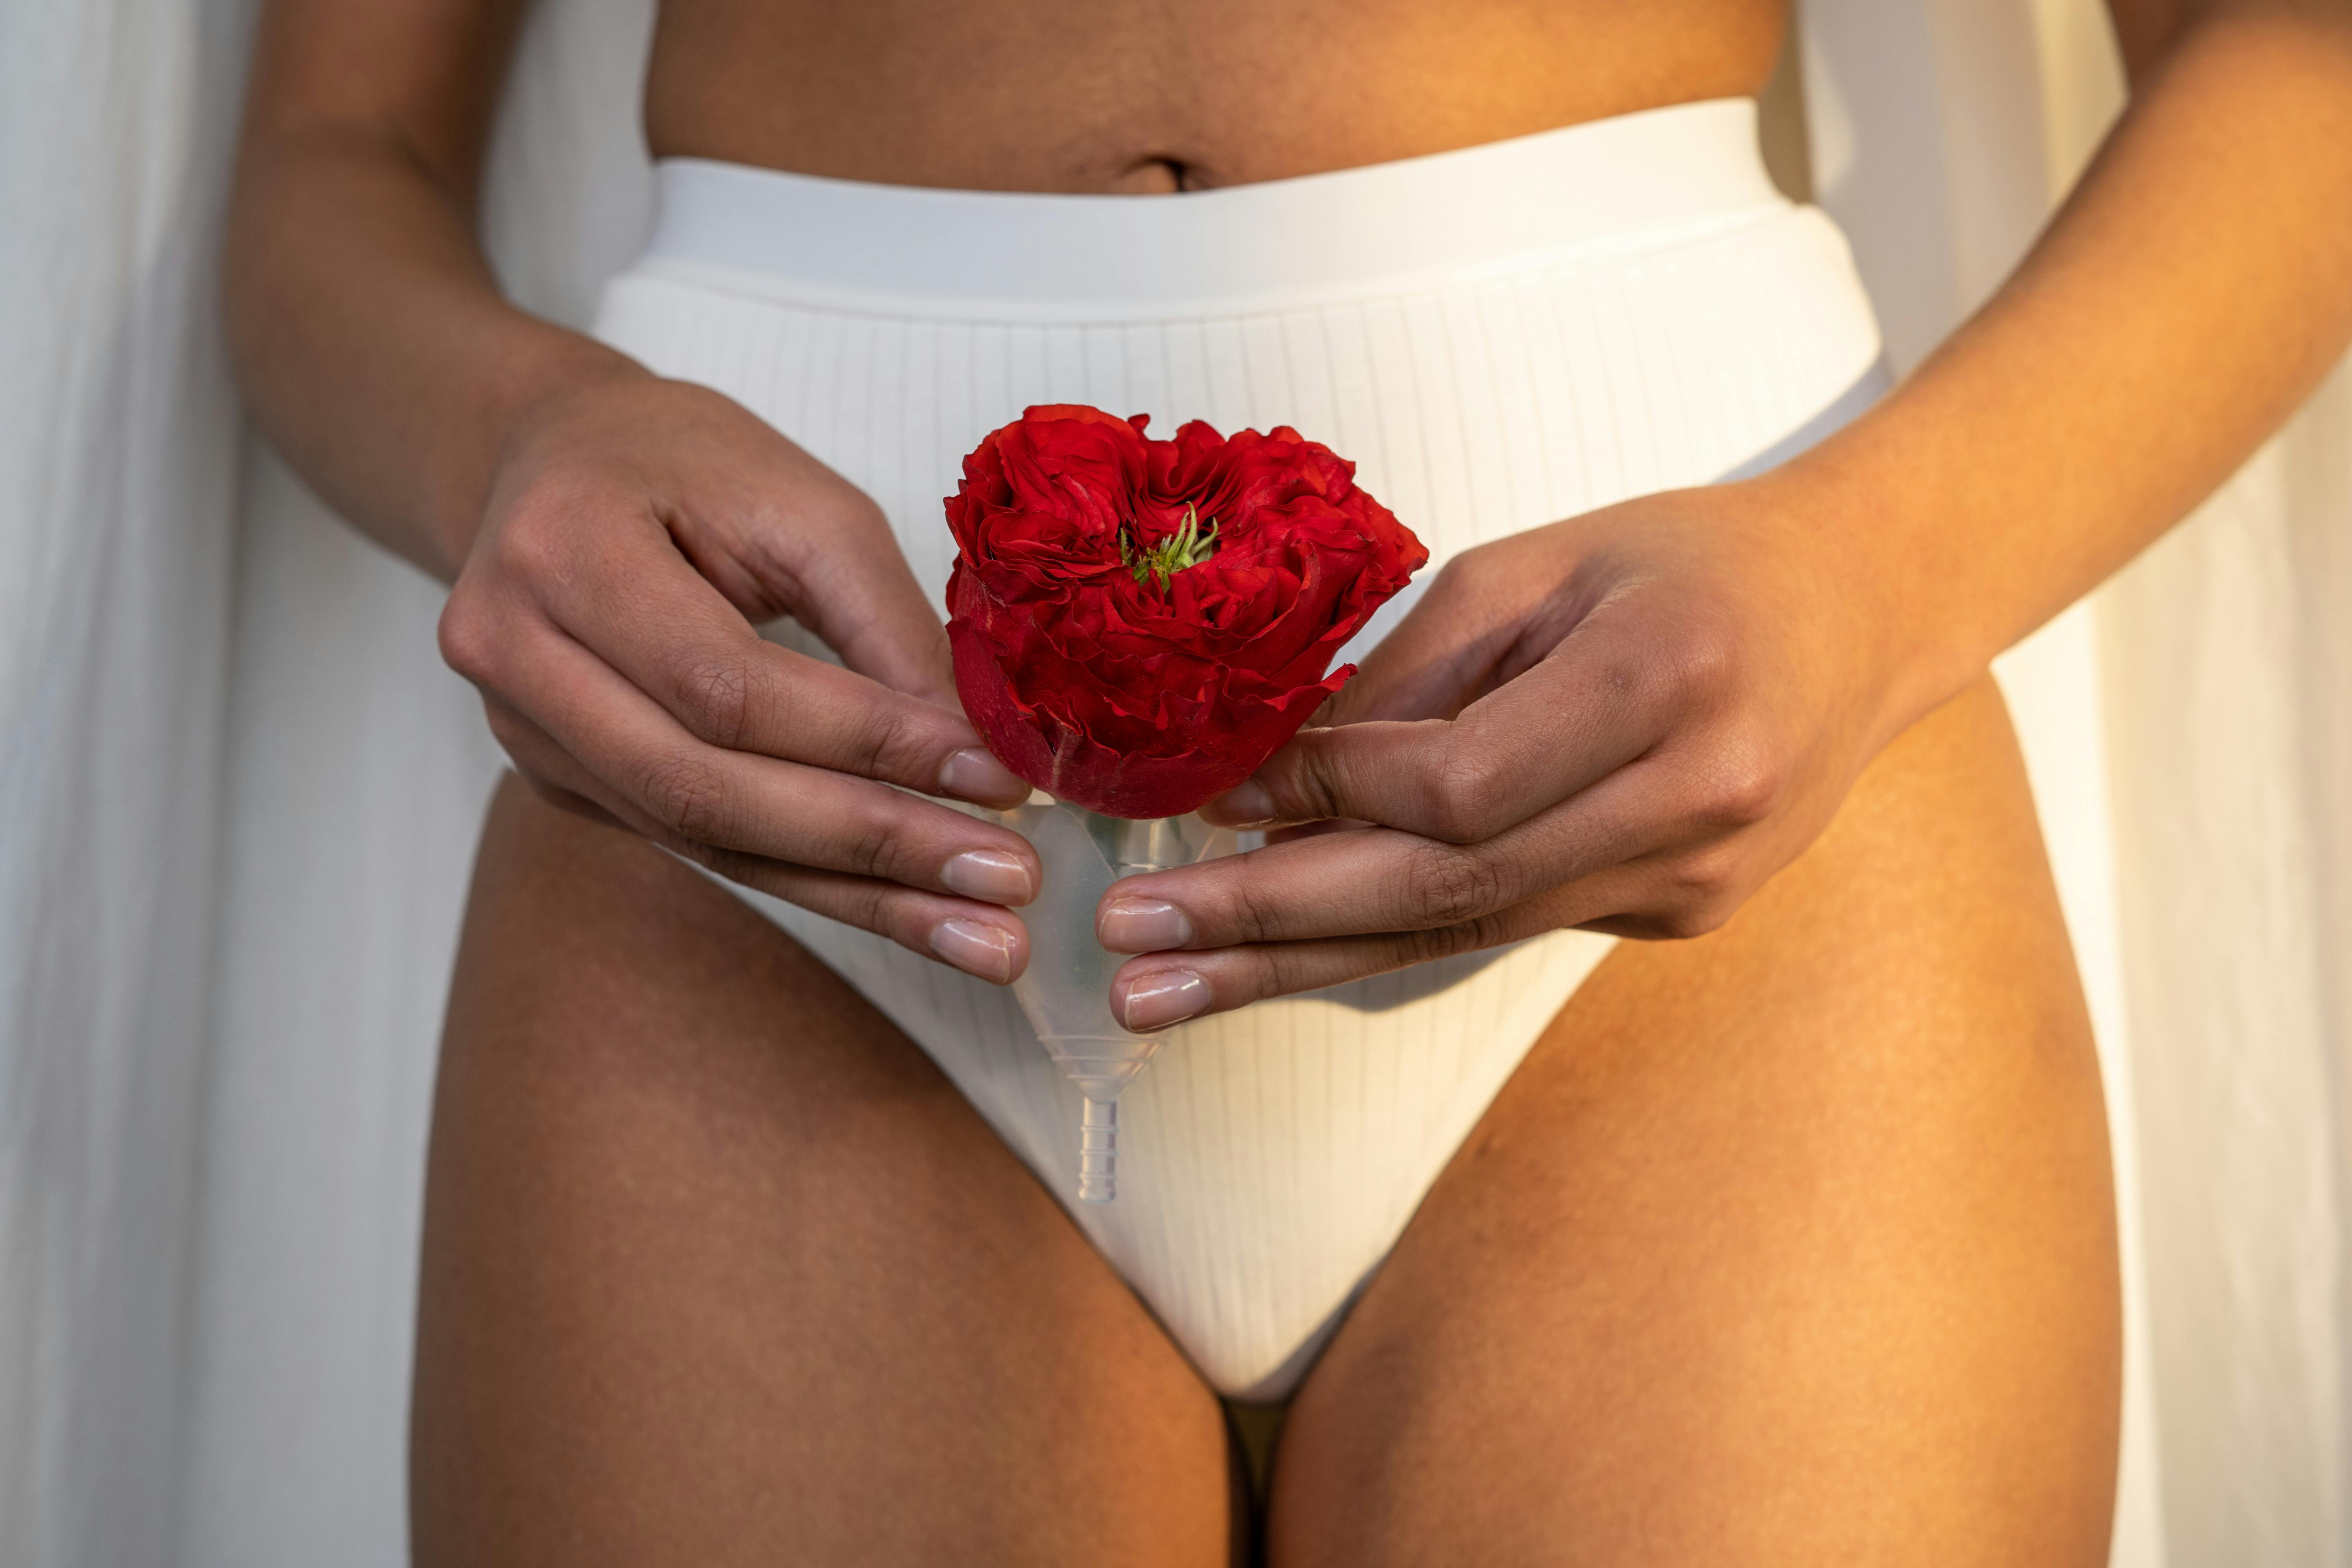 woman in white underwear holding red rose in a menstrual cup